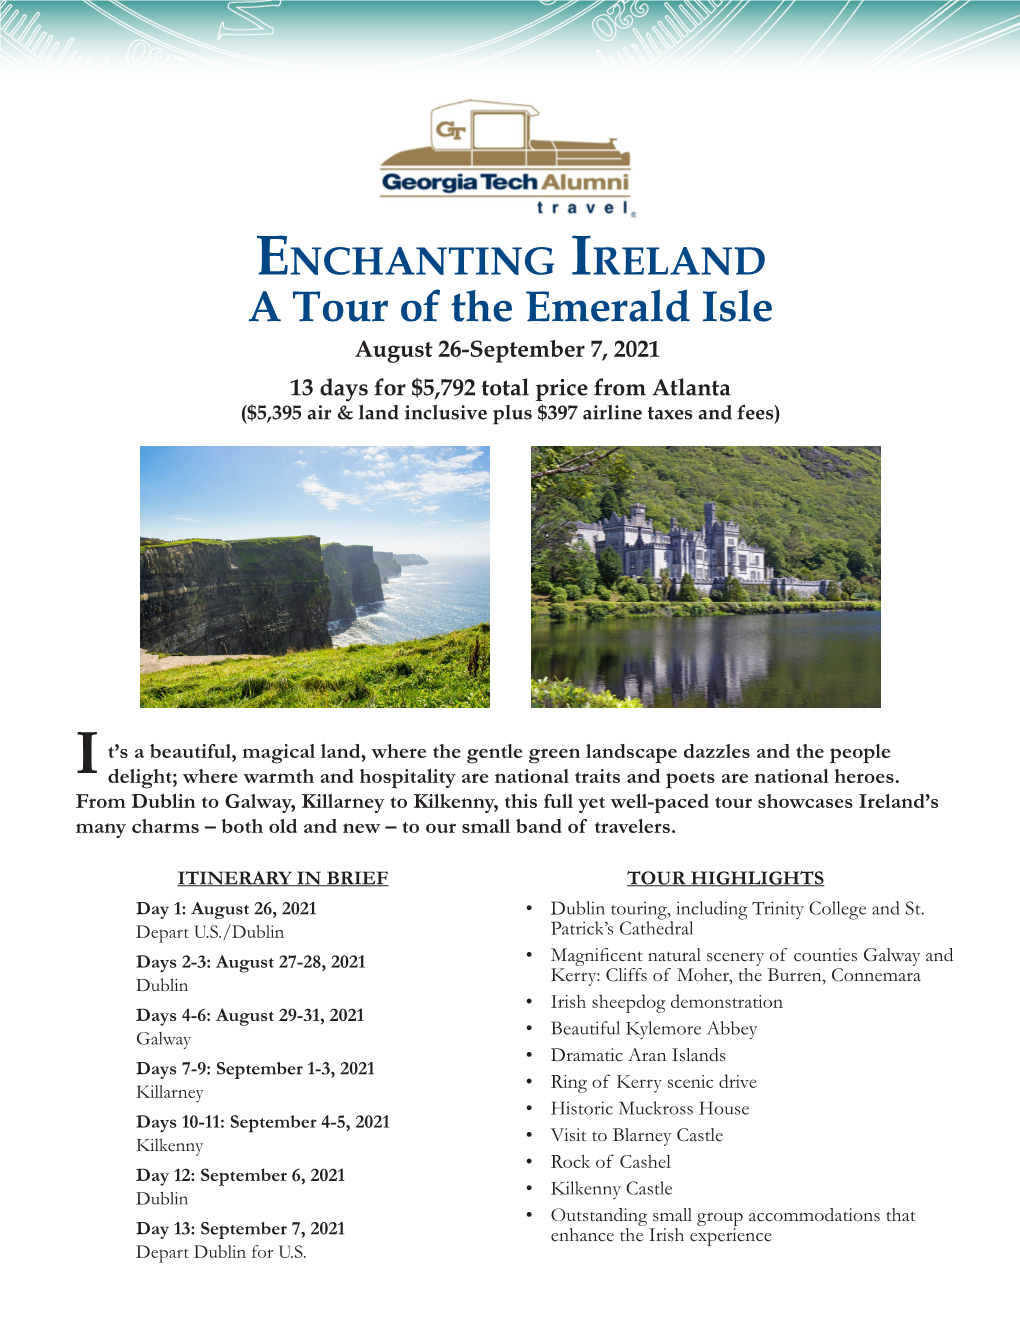 A Tour of the Emerald Isle August 26-September 7, 2021 13 Days for $5,792 Total Price from Atlanta ($5,395 Air & Land Inclusive Plus $397 Airline Taxes and Fees)